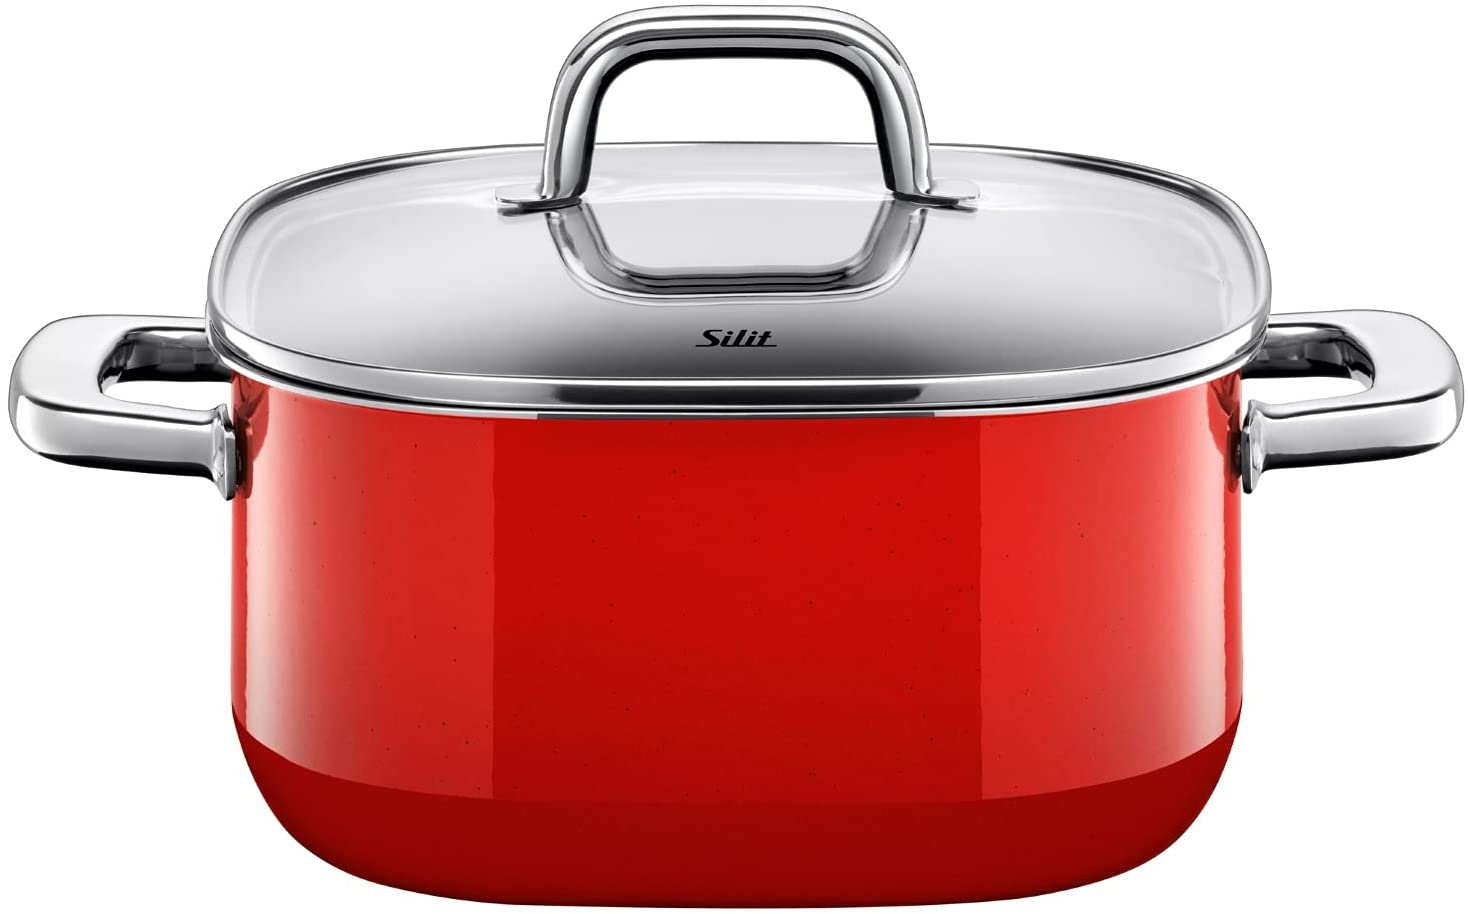 Silit Casserole Pot 22 x 22 cm approx. 4,4l Quadro Red Square Shape Stackable Glass Silargan Function Lid Ceramic Suitable for Induction Cookers Dishwasher Safe Made in Germany No 2101299547